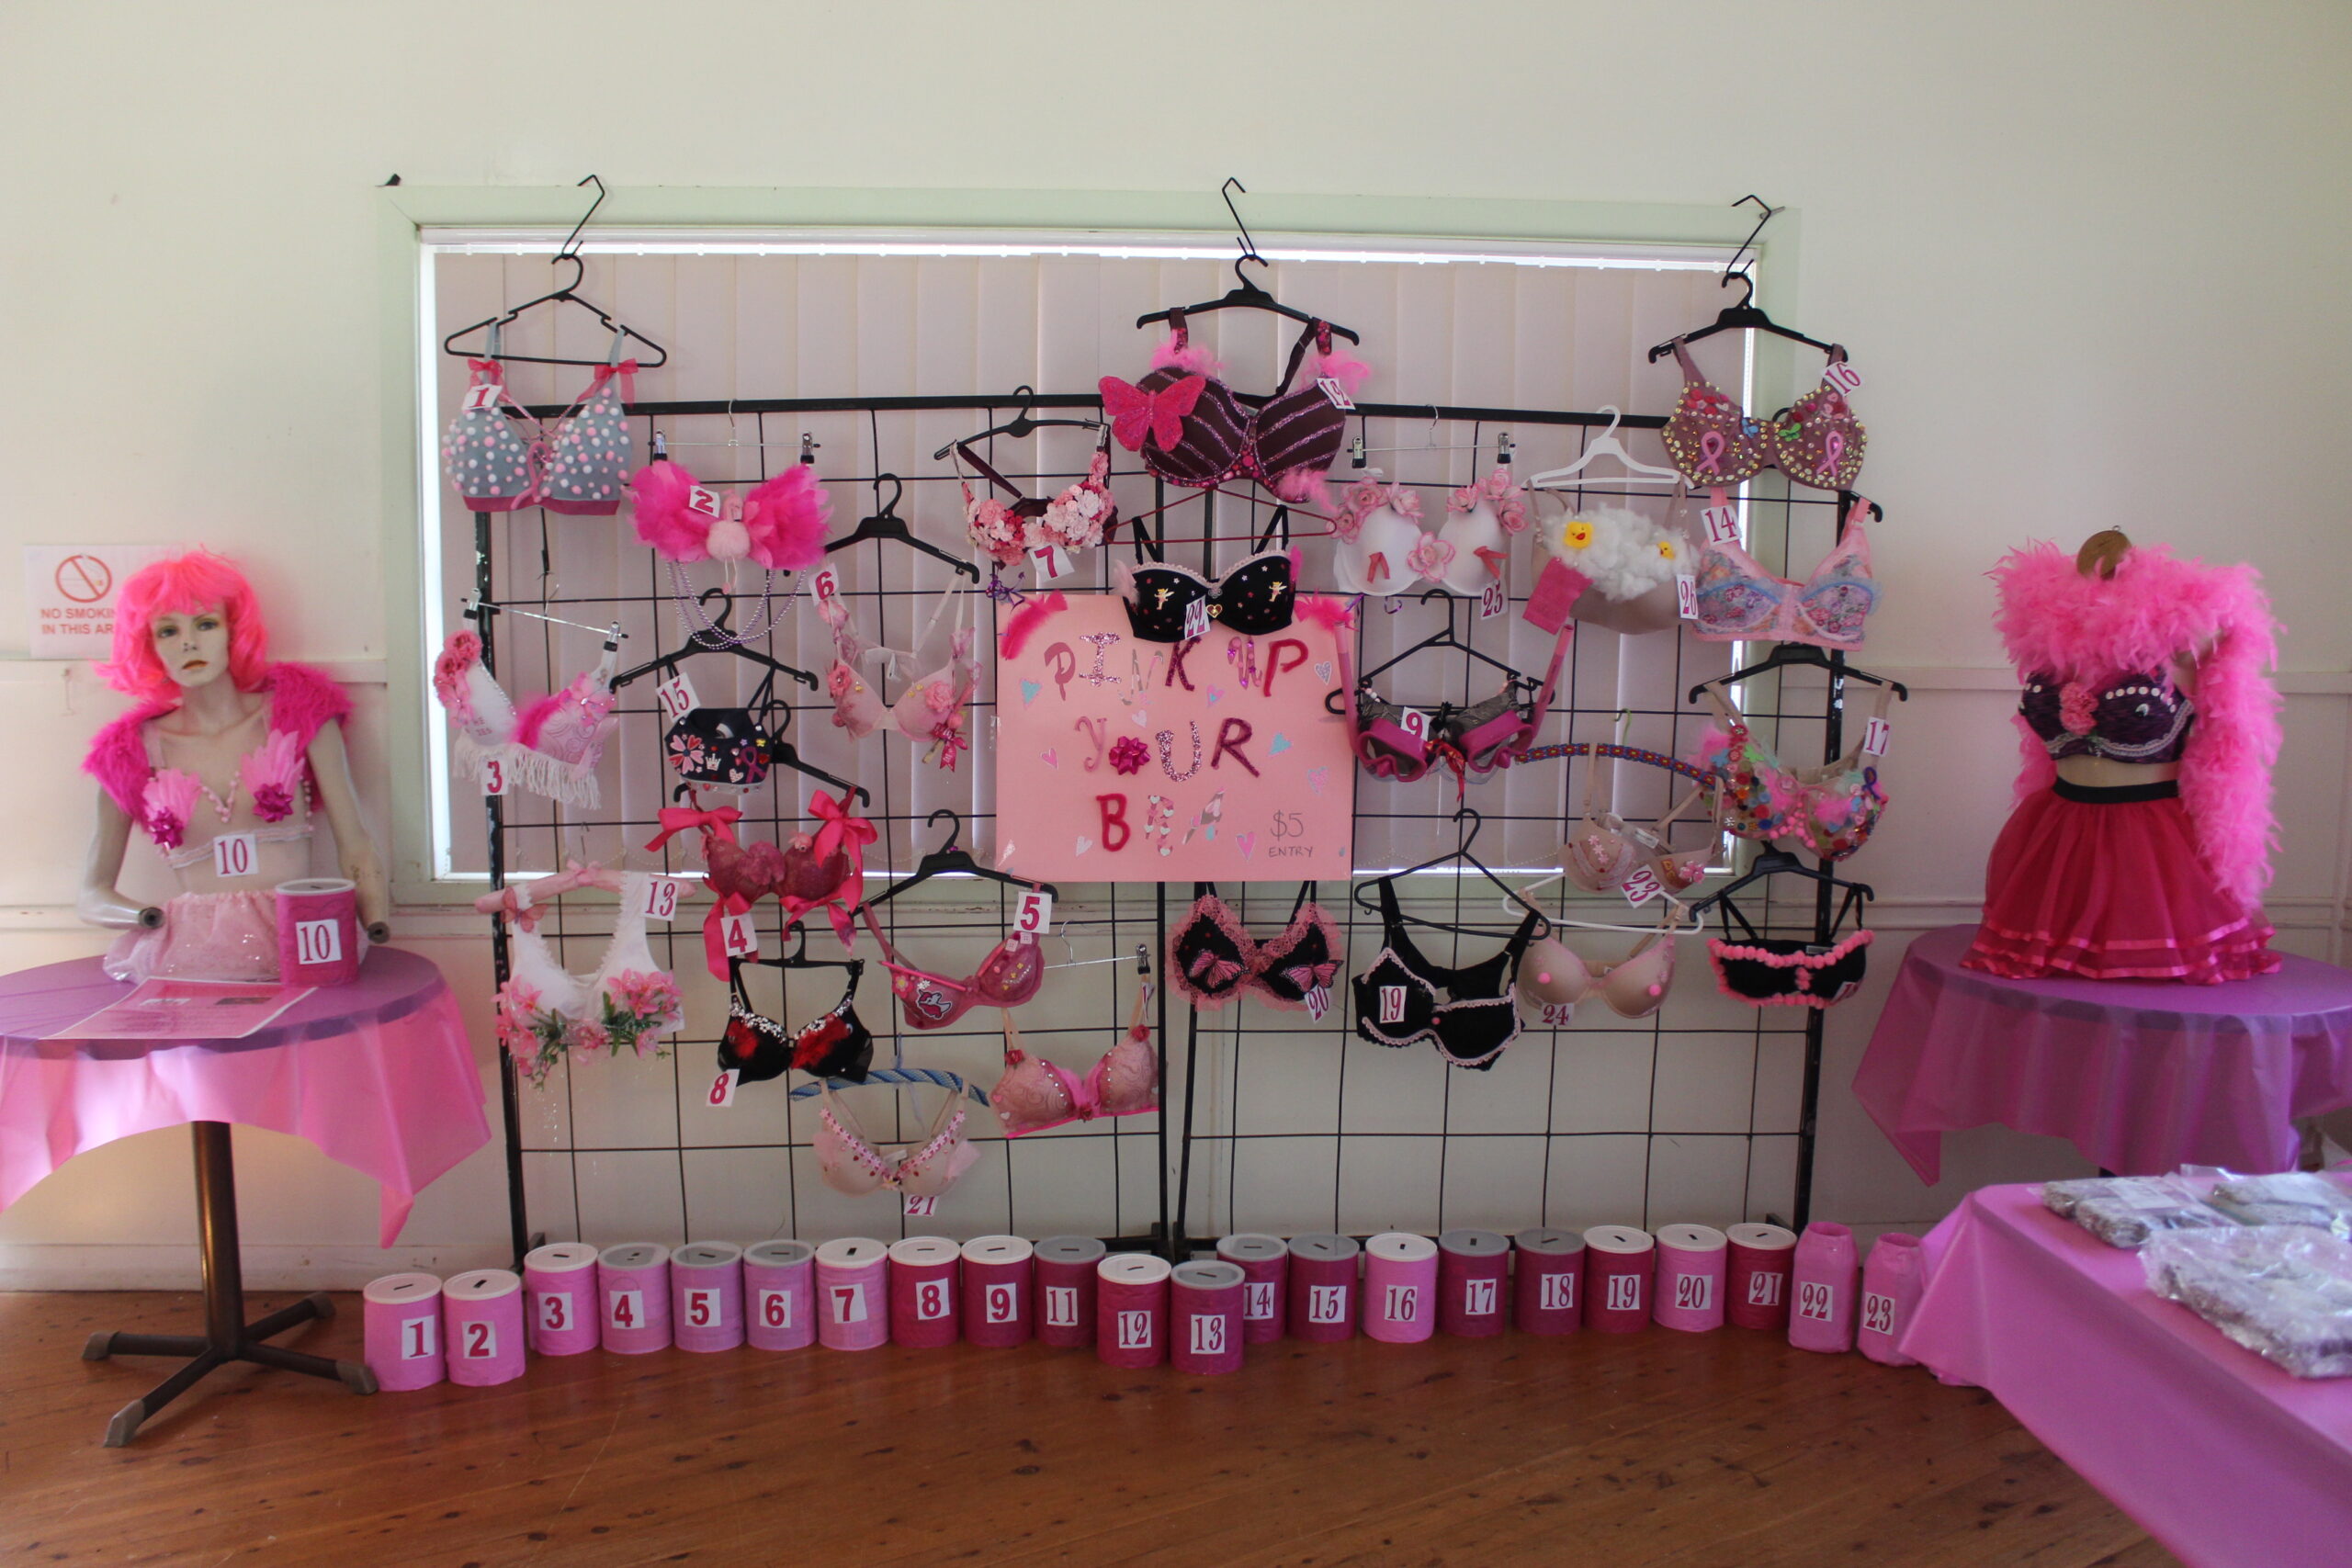 Pink Up your bra competition received 27 entries.